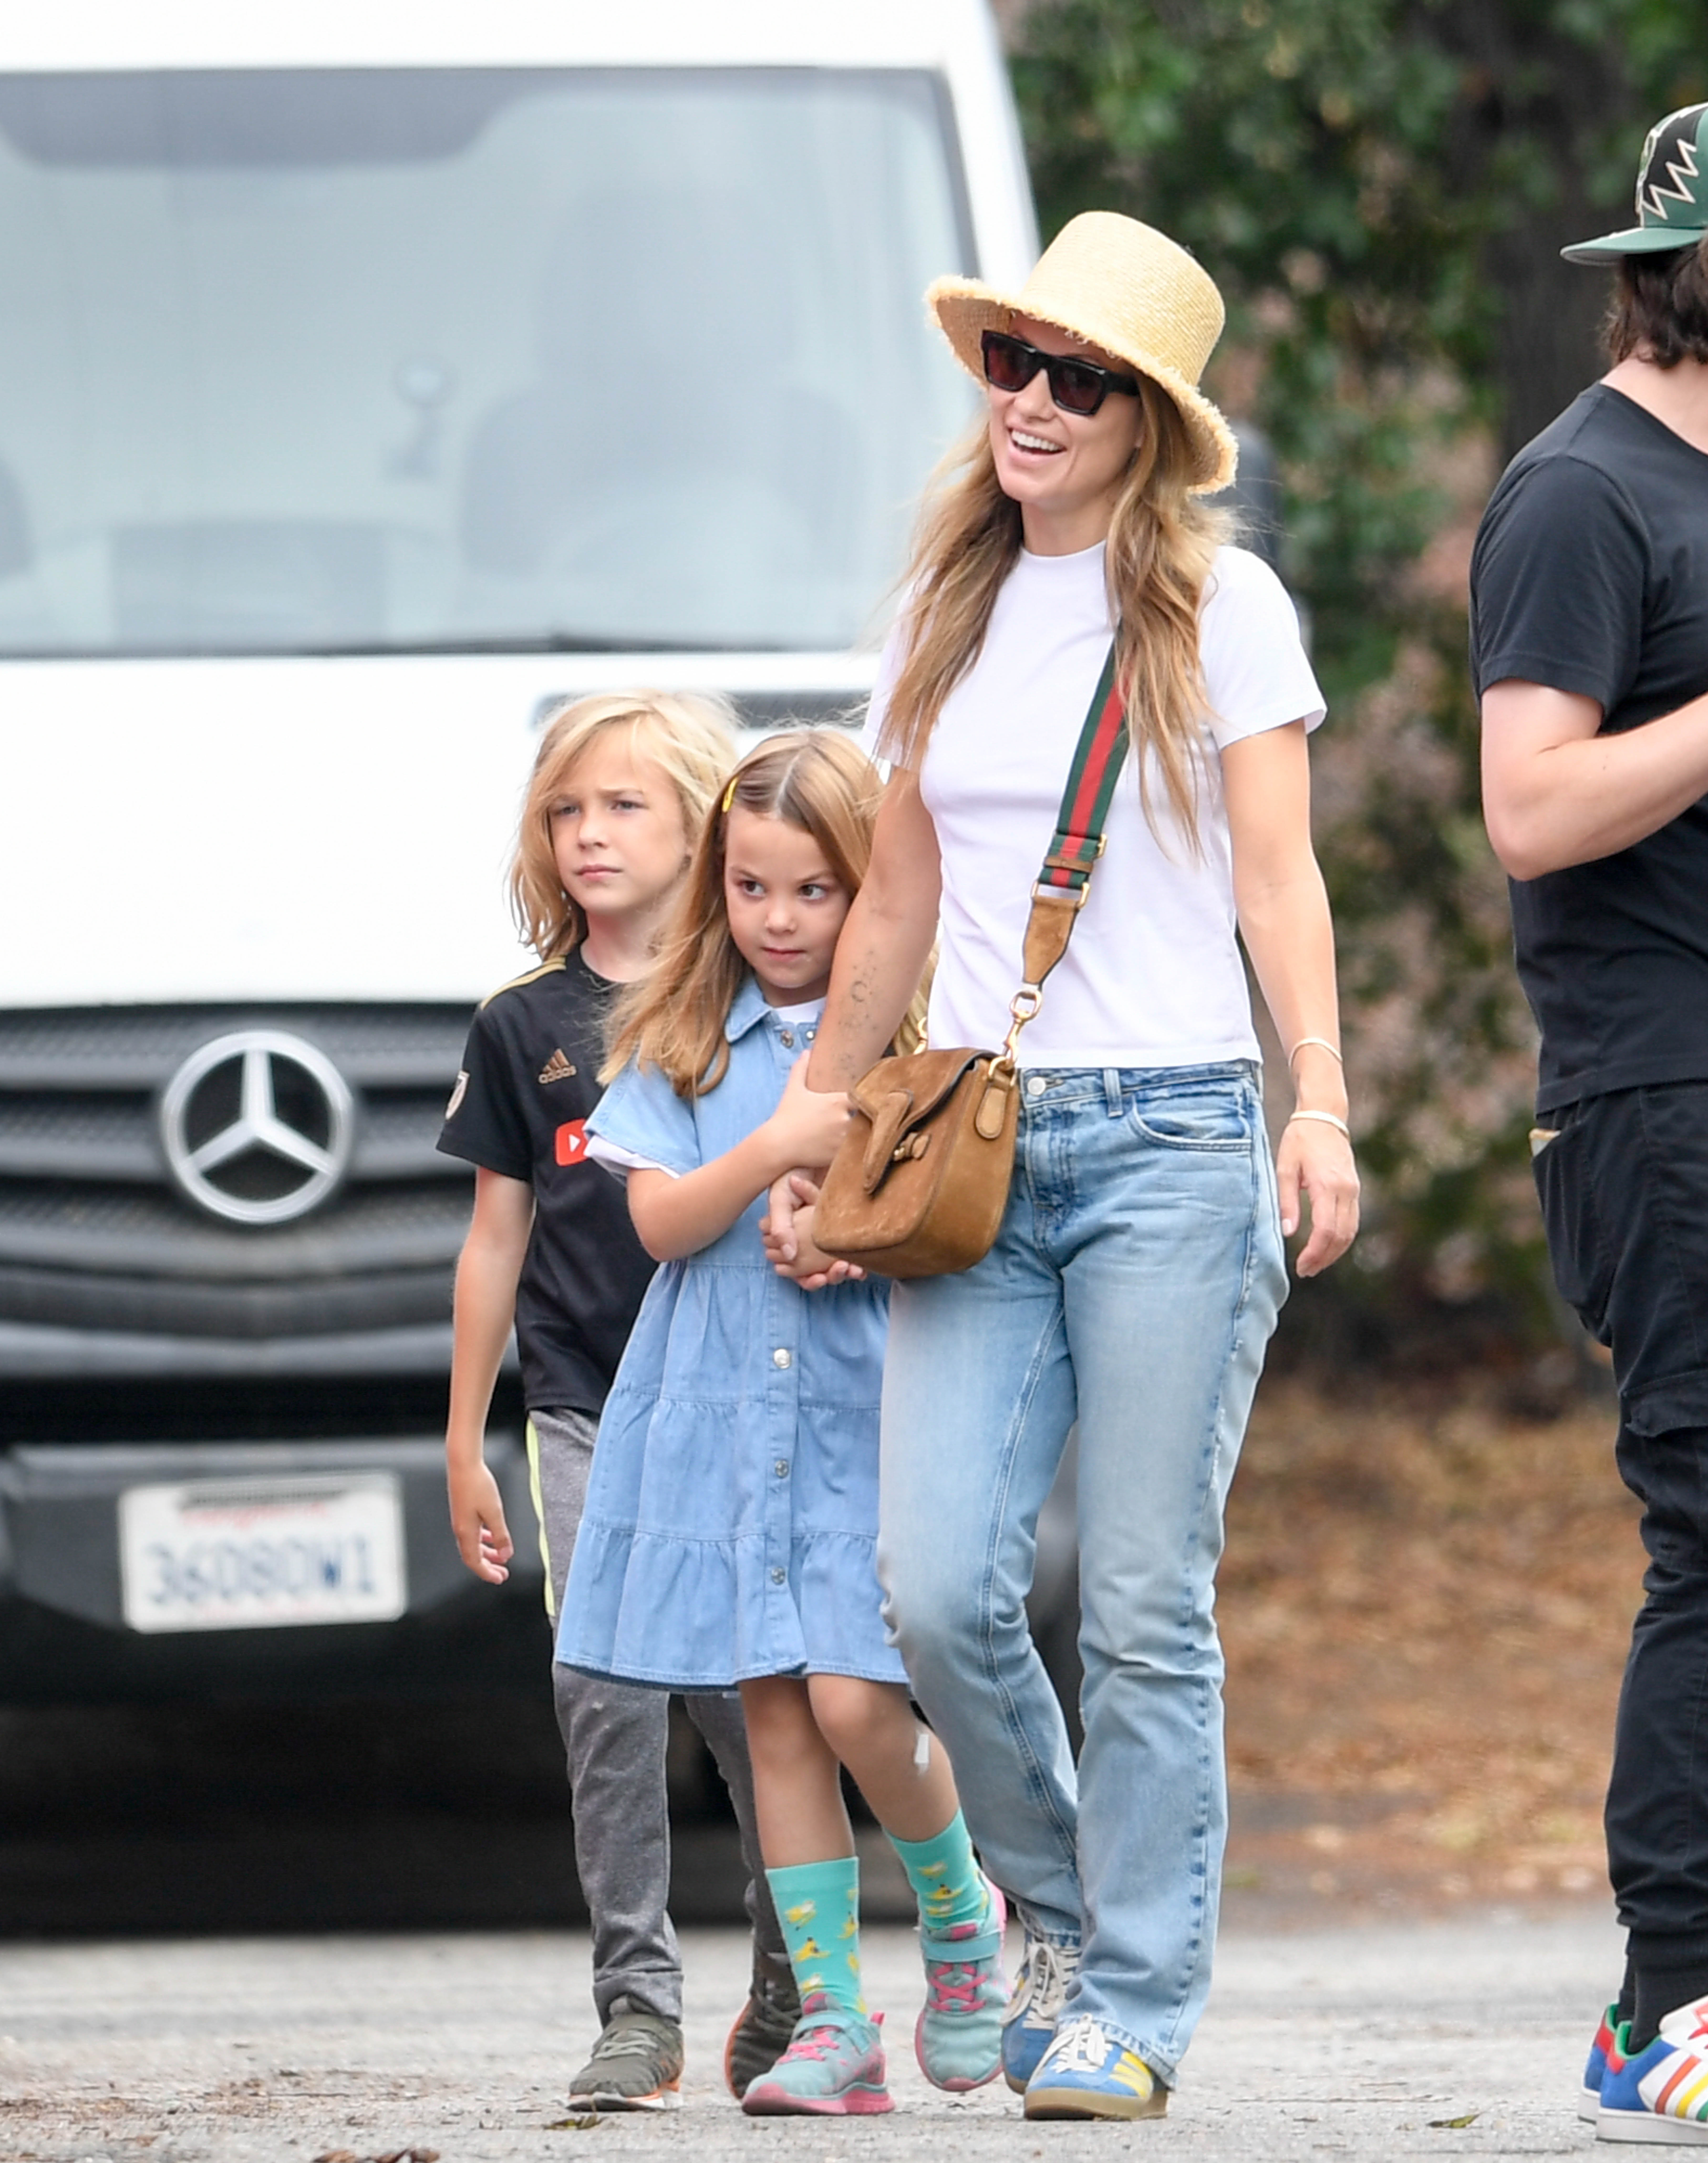 Olivia Wilde with her children in Los Angeles on the set of "Don't Worry Darling" (The Grosby Group)